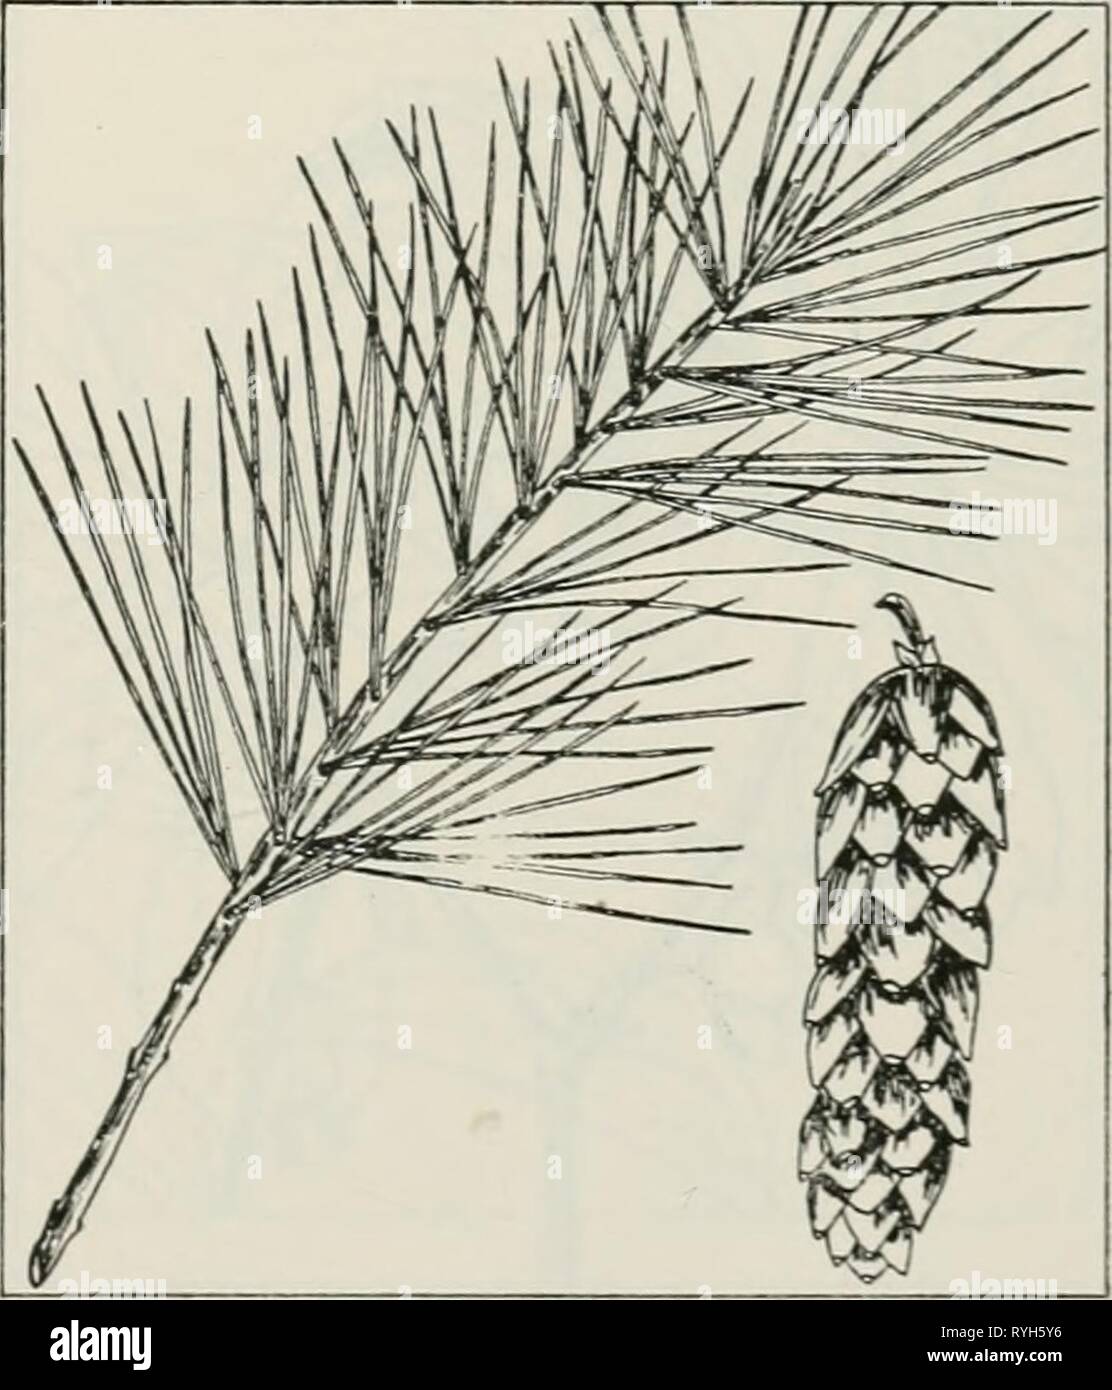 The drug plants of Illinois  drugplantsofilli44teho Year: 1951  PINUS STROBUS L. White pine. Pinaceae.—A tall, straight, evergreen tree 90 feet or more in height; bark of the trunk dark gray, divided by shallow fissures into broad, continuous ridges; foliage in the form of needles; needles in bundles of 5; fruit a long-stalked, pendant cone 4 to 6 inches long. The inner white bark is collected. Na- tive and localized in Jo Daviess, Ogle, Lake, and La Salle counties; also planted extensively for reforestation. Contains tannin and an oleoresin. Used as a mild expectorant.  Pinus syl'vestris L., Stock Photo